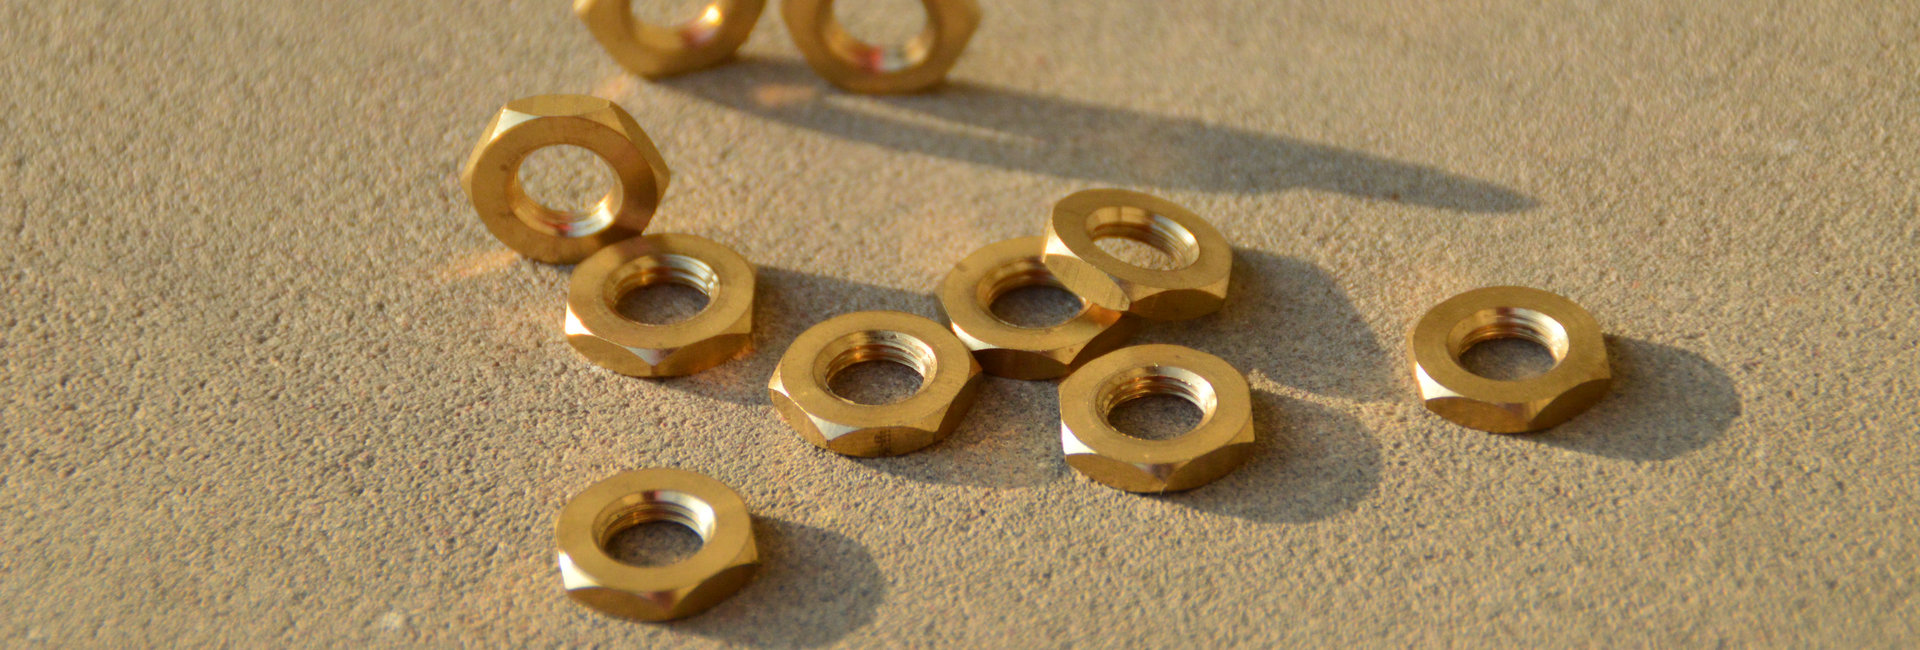 brass hex panel nust and jam nuts supplier